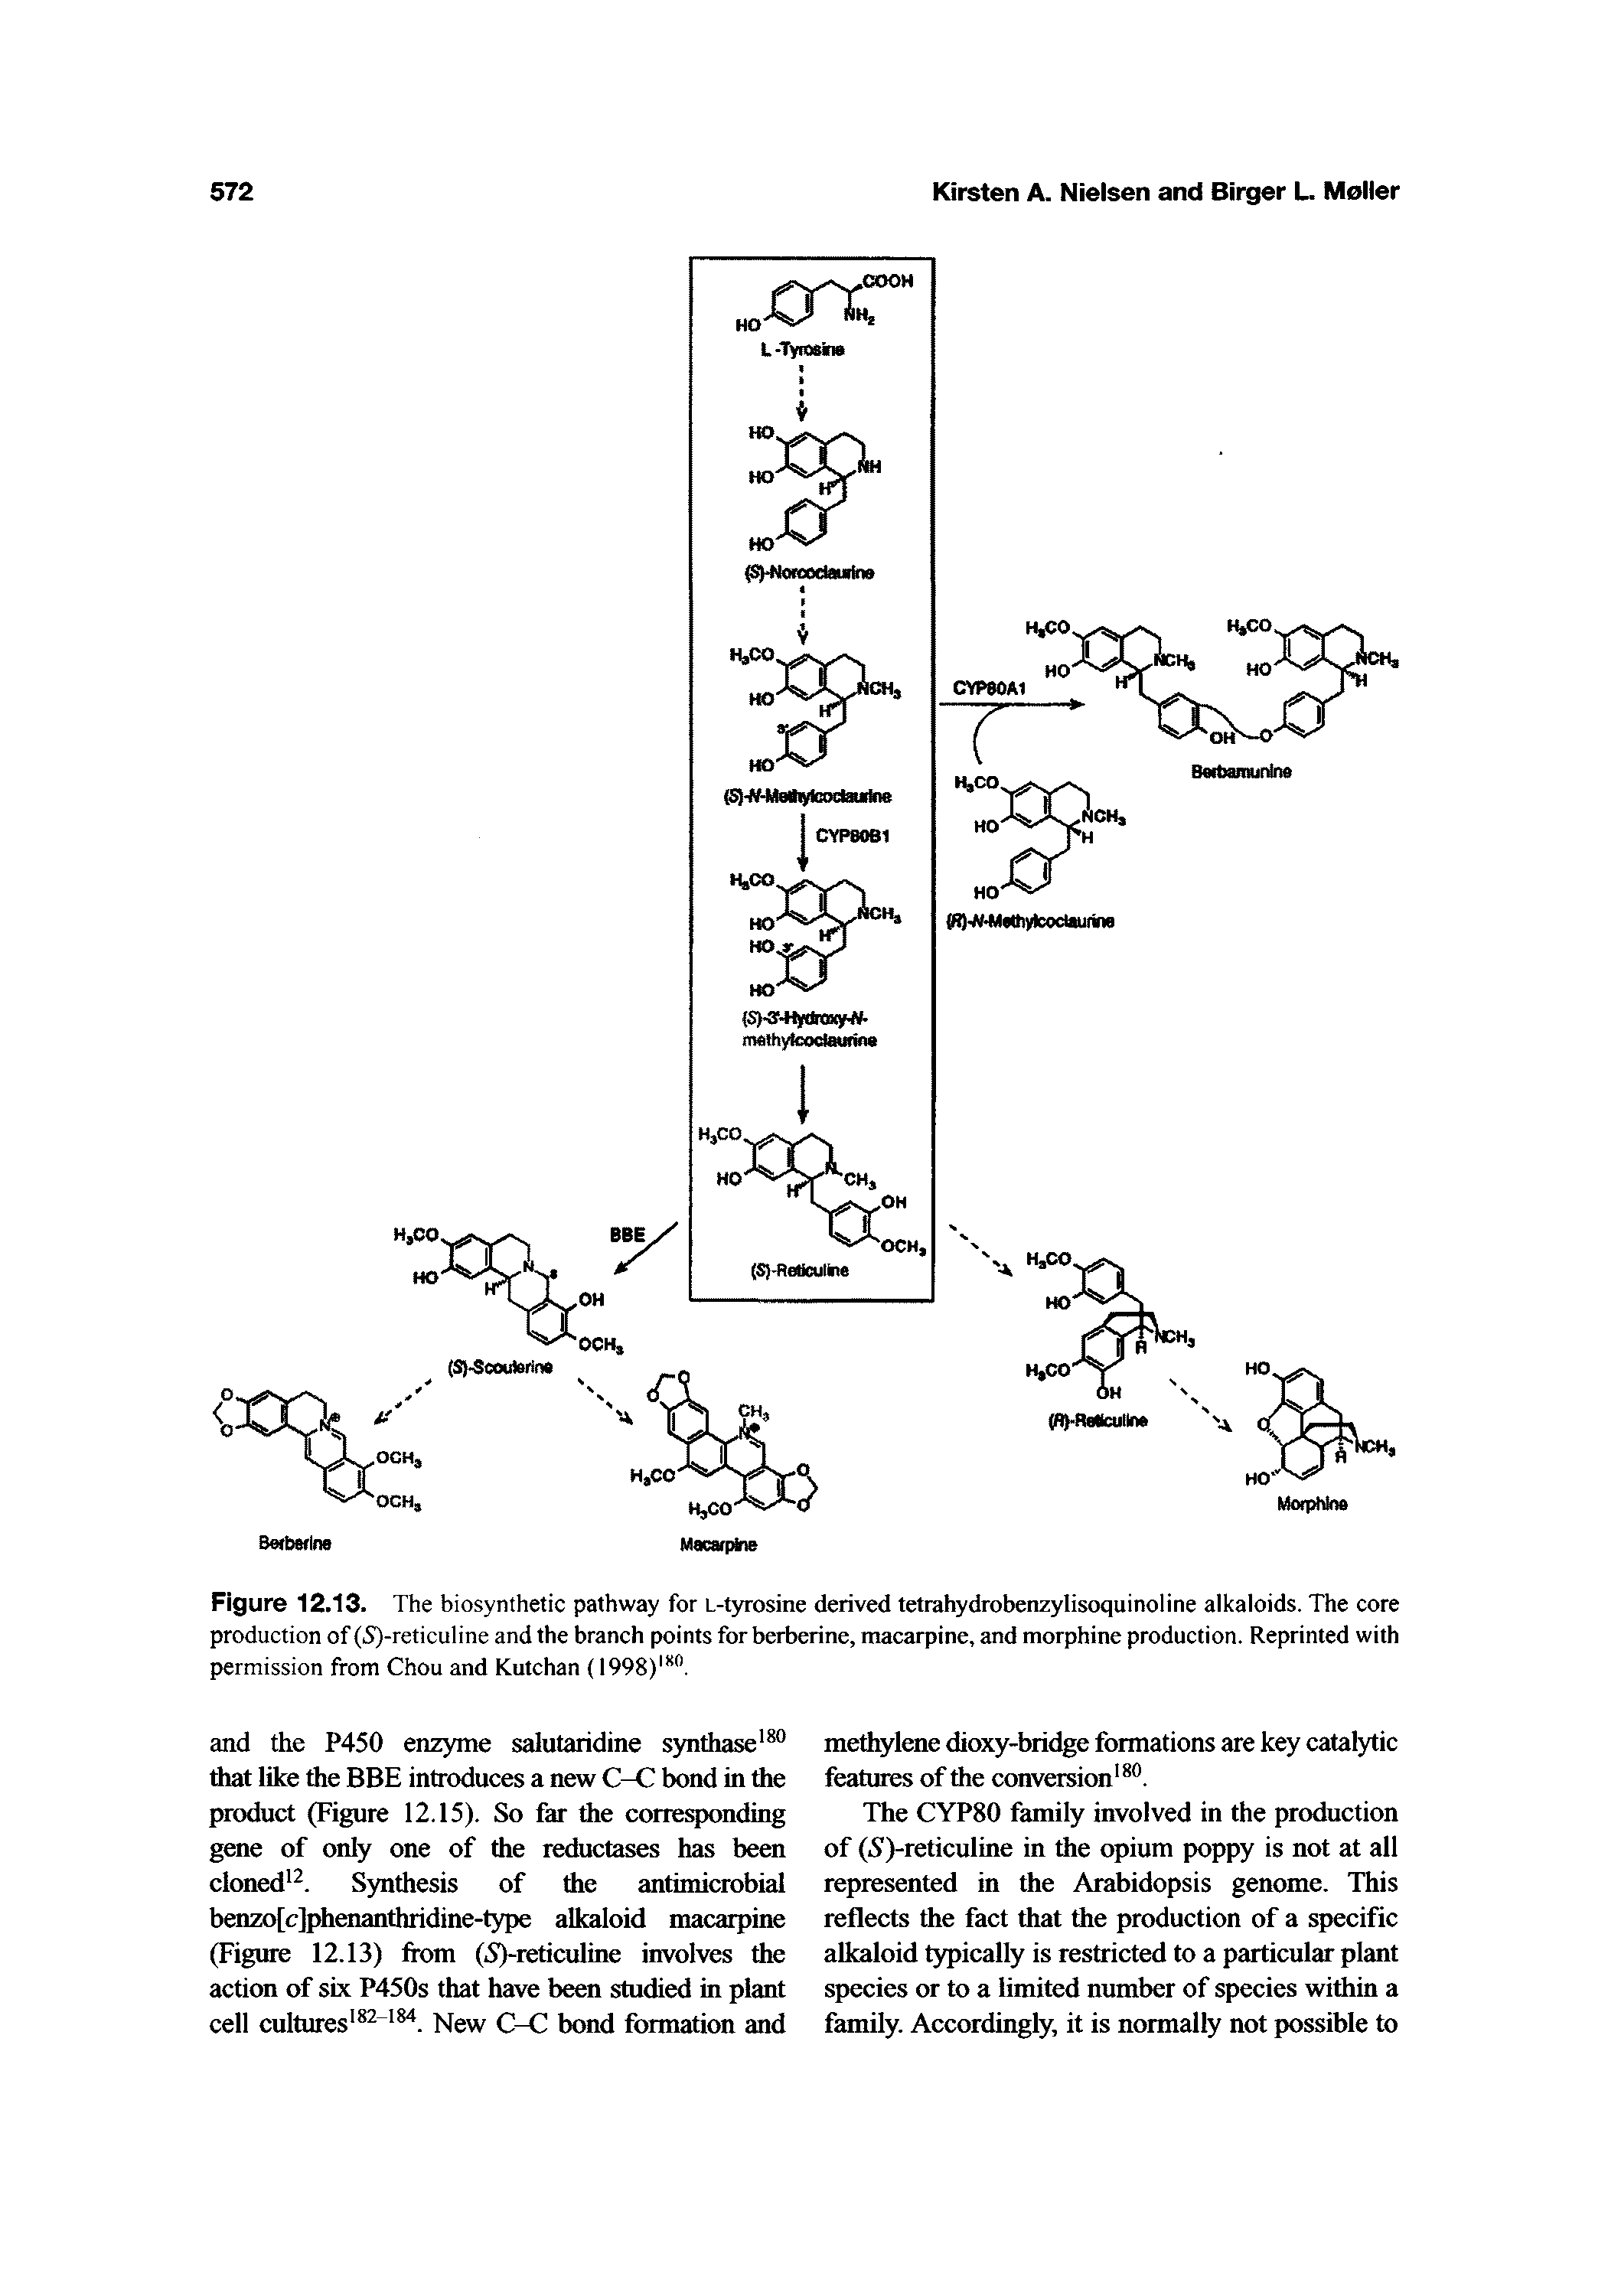 Figure 12.13. The biosynthetic pathway for L-tyrosine derived tetrahydrobenzylisoquinoline alkaloids. The core production of (5)-reticuline and the branch points for berberine, macarpine, and morphine production. Reprinted with permission from Chou and Kutchan (I998)" .